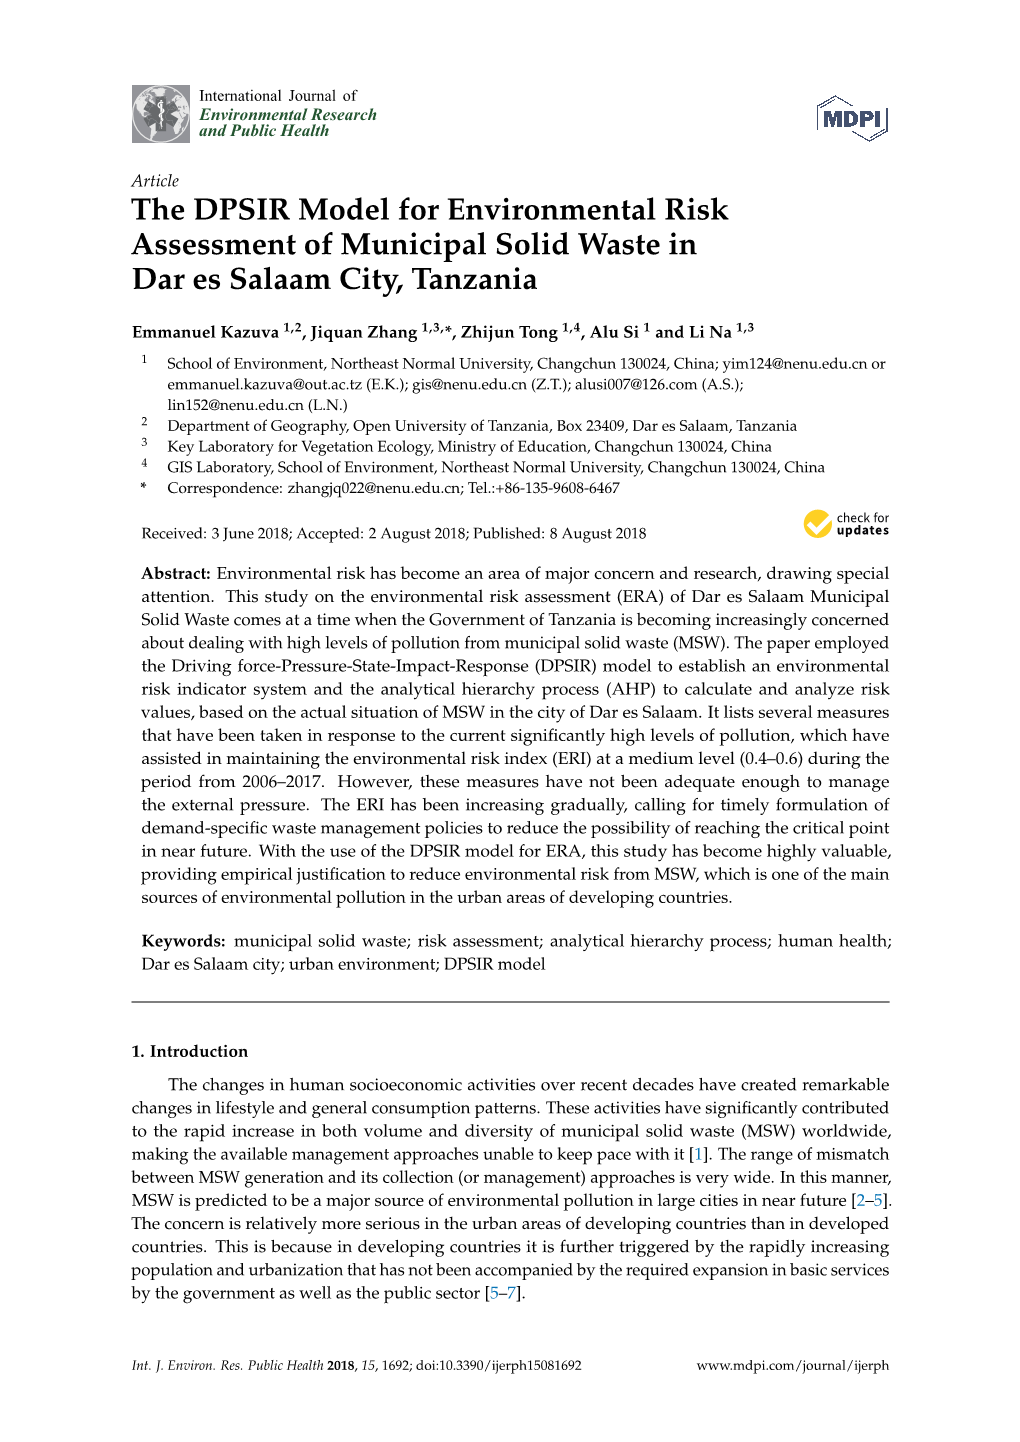 The DPSIR Model for Environmental Risk Assessment of Municipal Solid Waste in Dar Es Salaam City, Tanzania